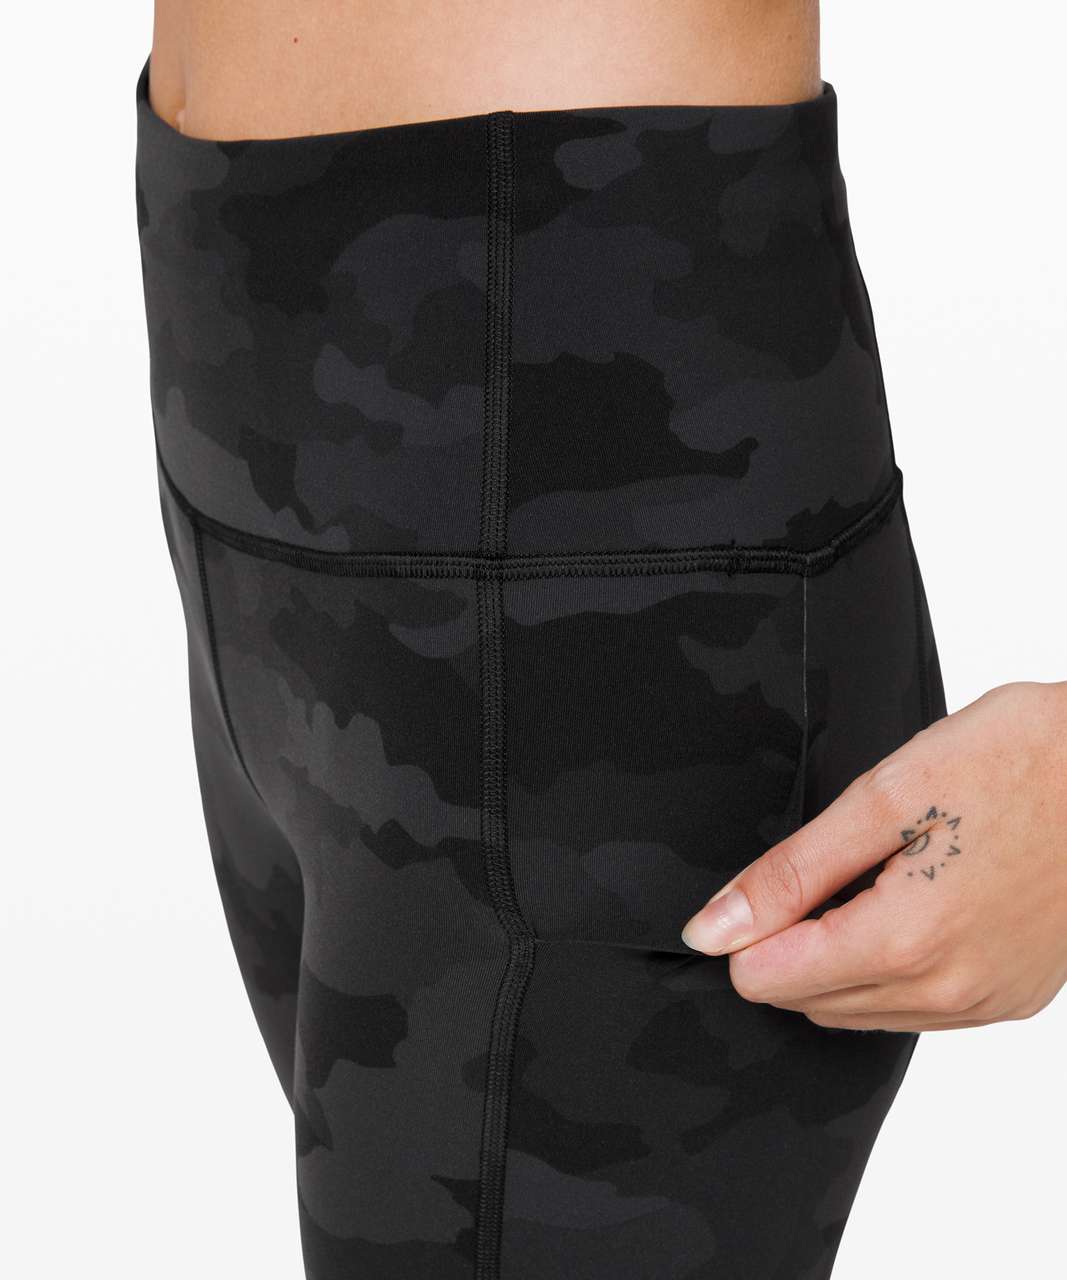 Lululemon Pace Pusher High Rise Crop Leggings Black Animal Print Reflective  8 - $62 - From Marie